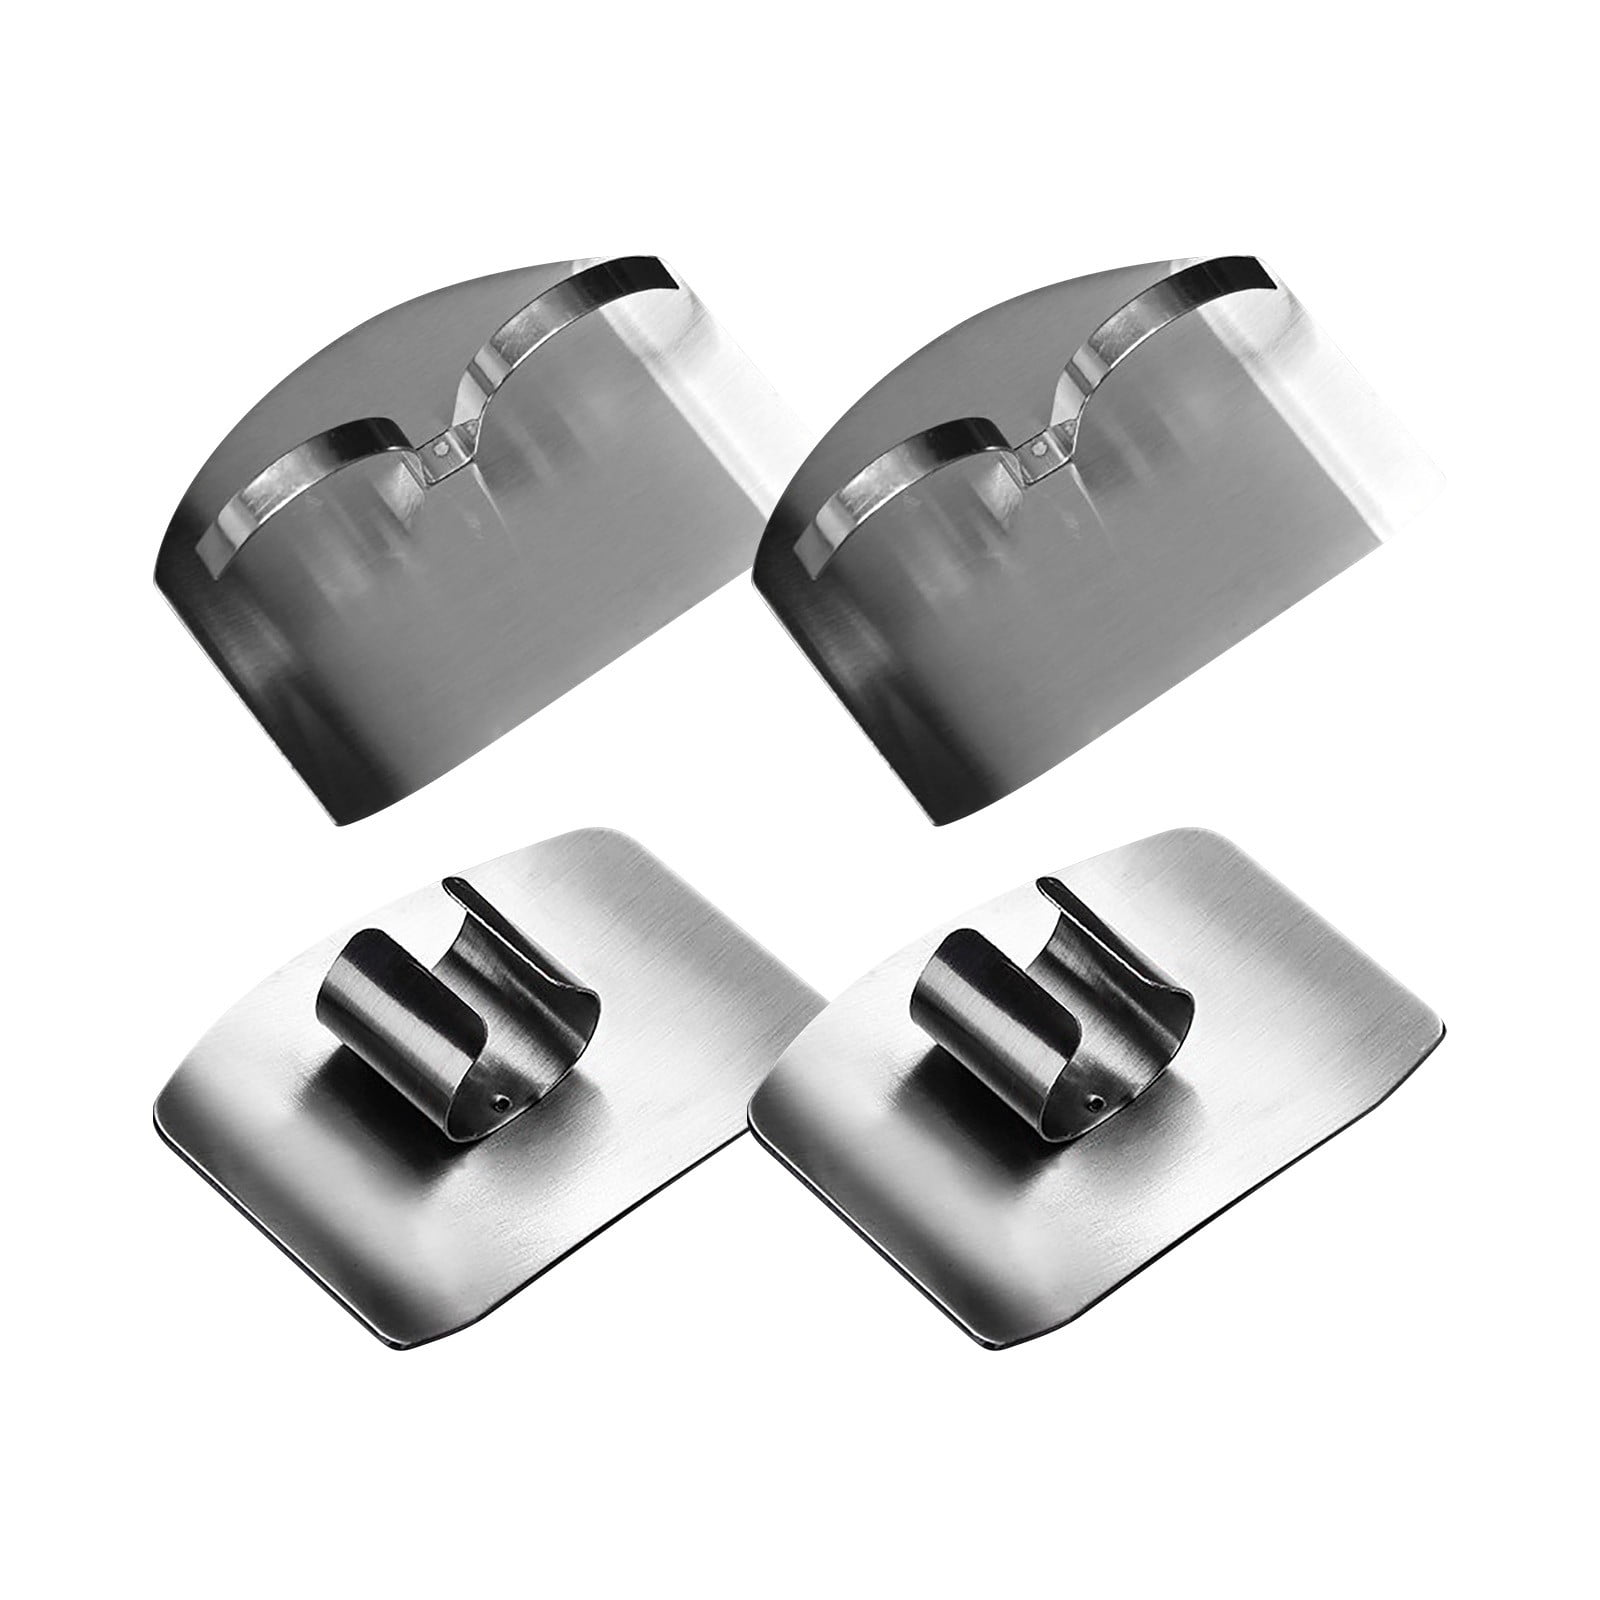 Happon Finger Guards for Cutting 2pcs Premium 304 Stainless Steel